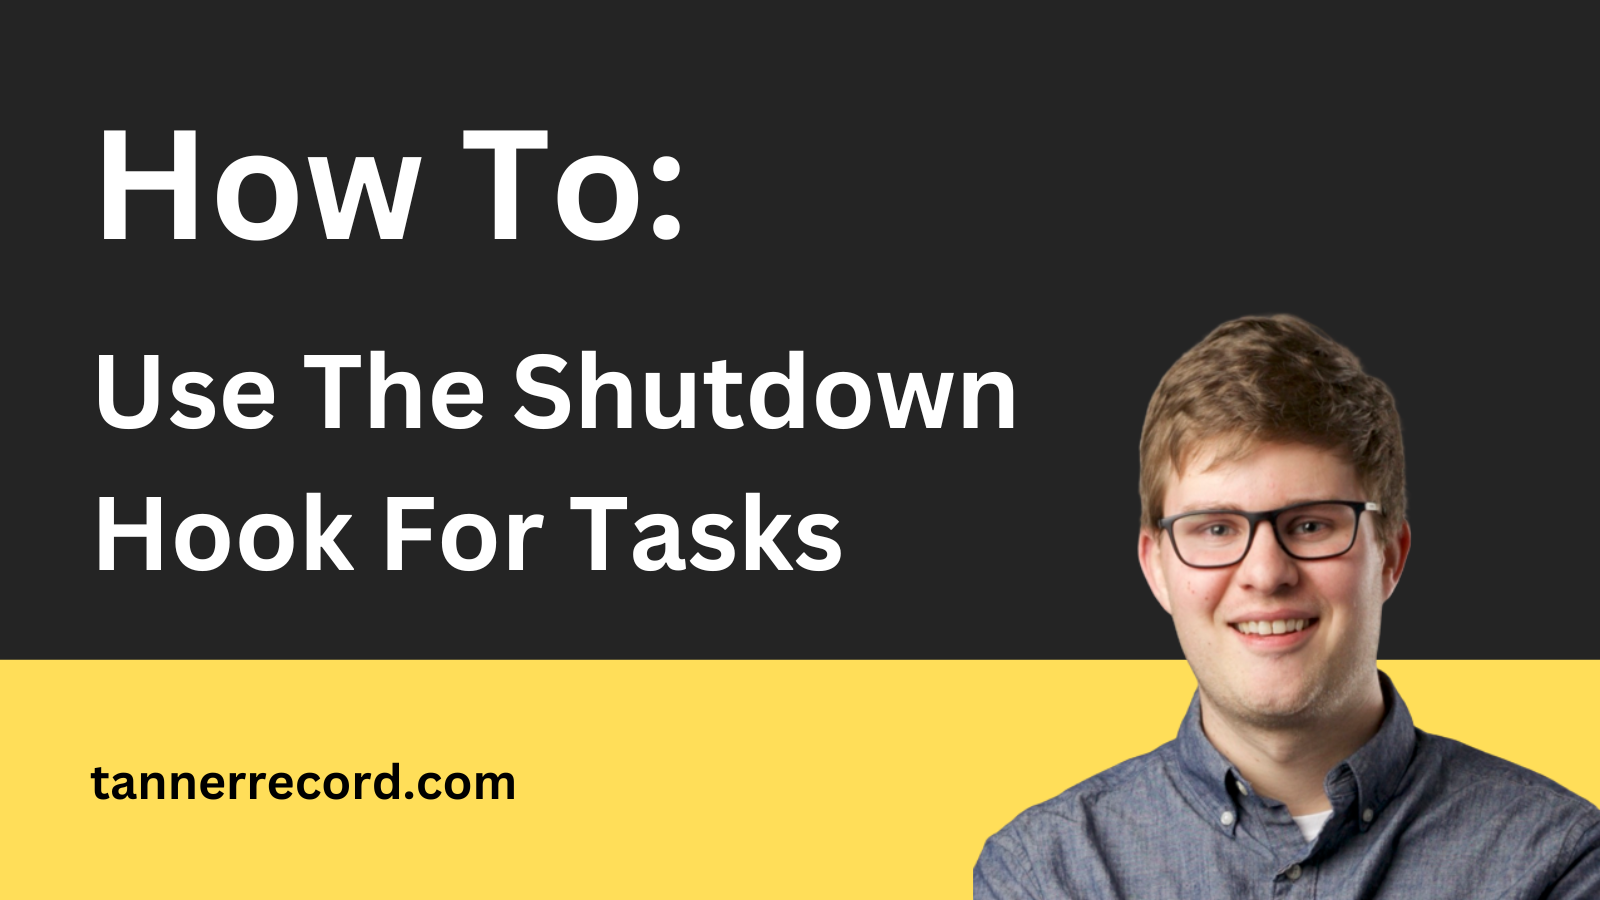 How to Use the Shutdown Hook for Tasks